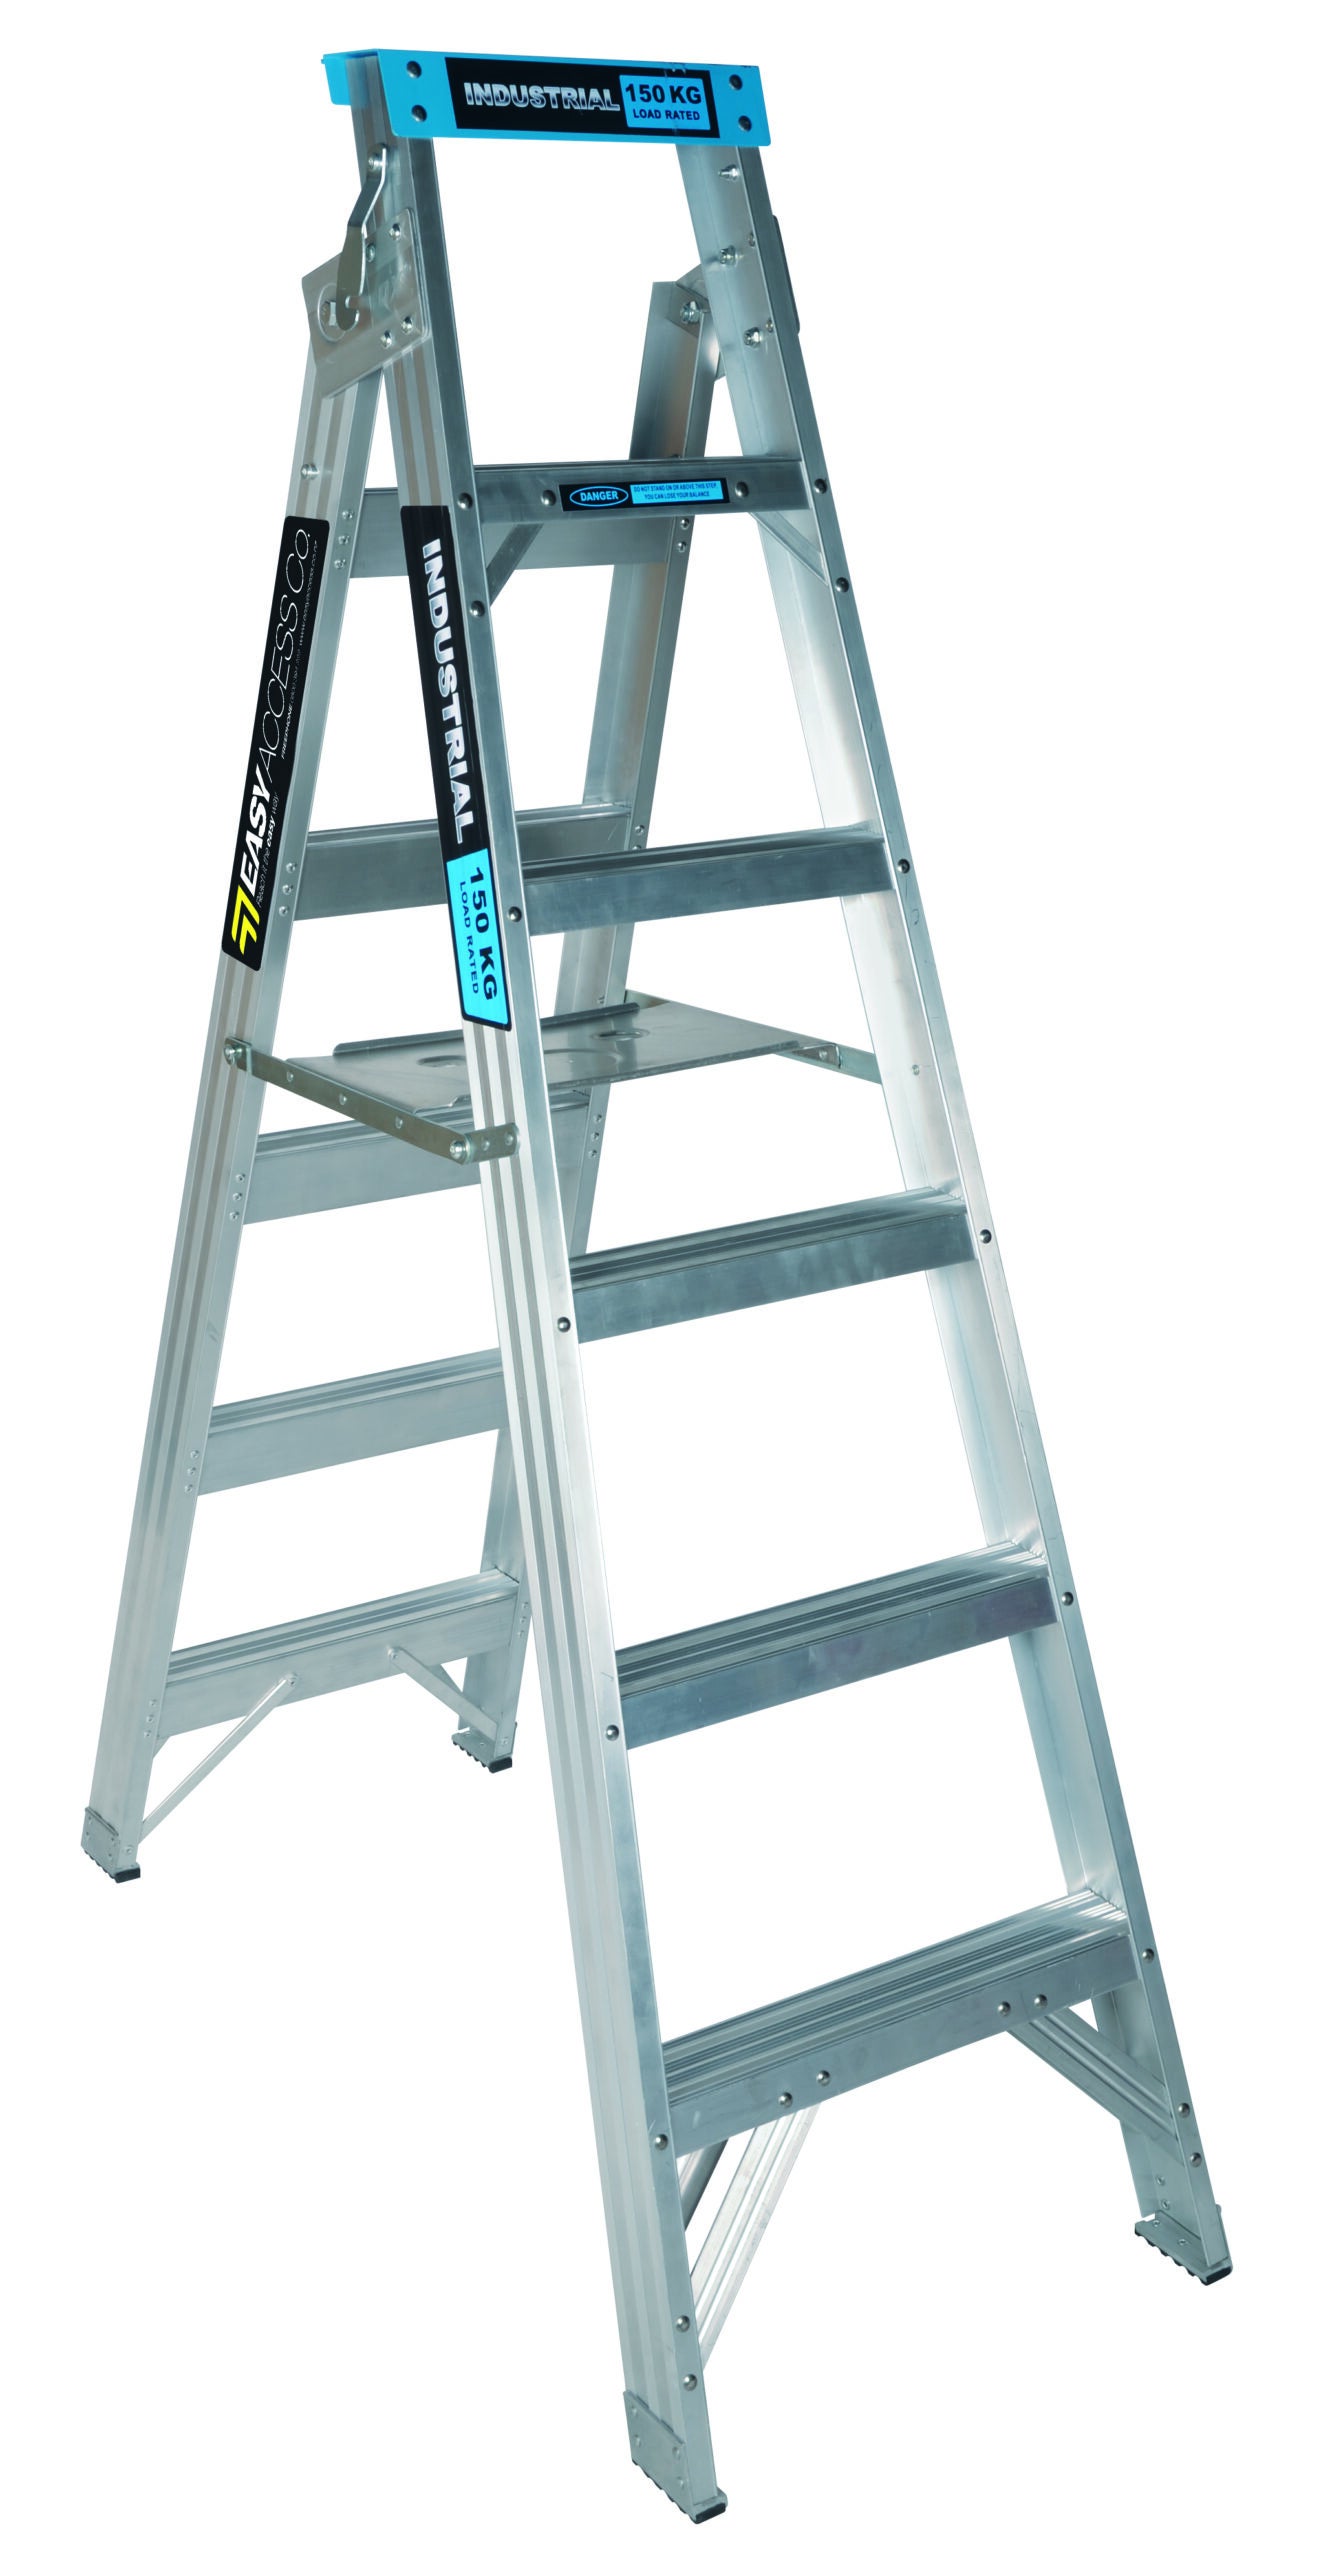 Easy Access Trade Series Step Extension Ladder